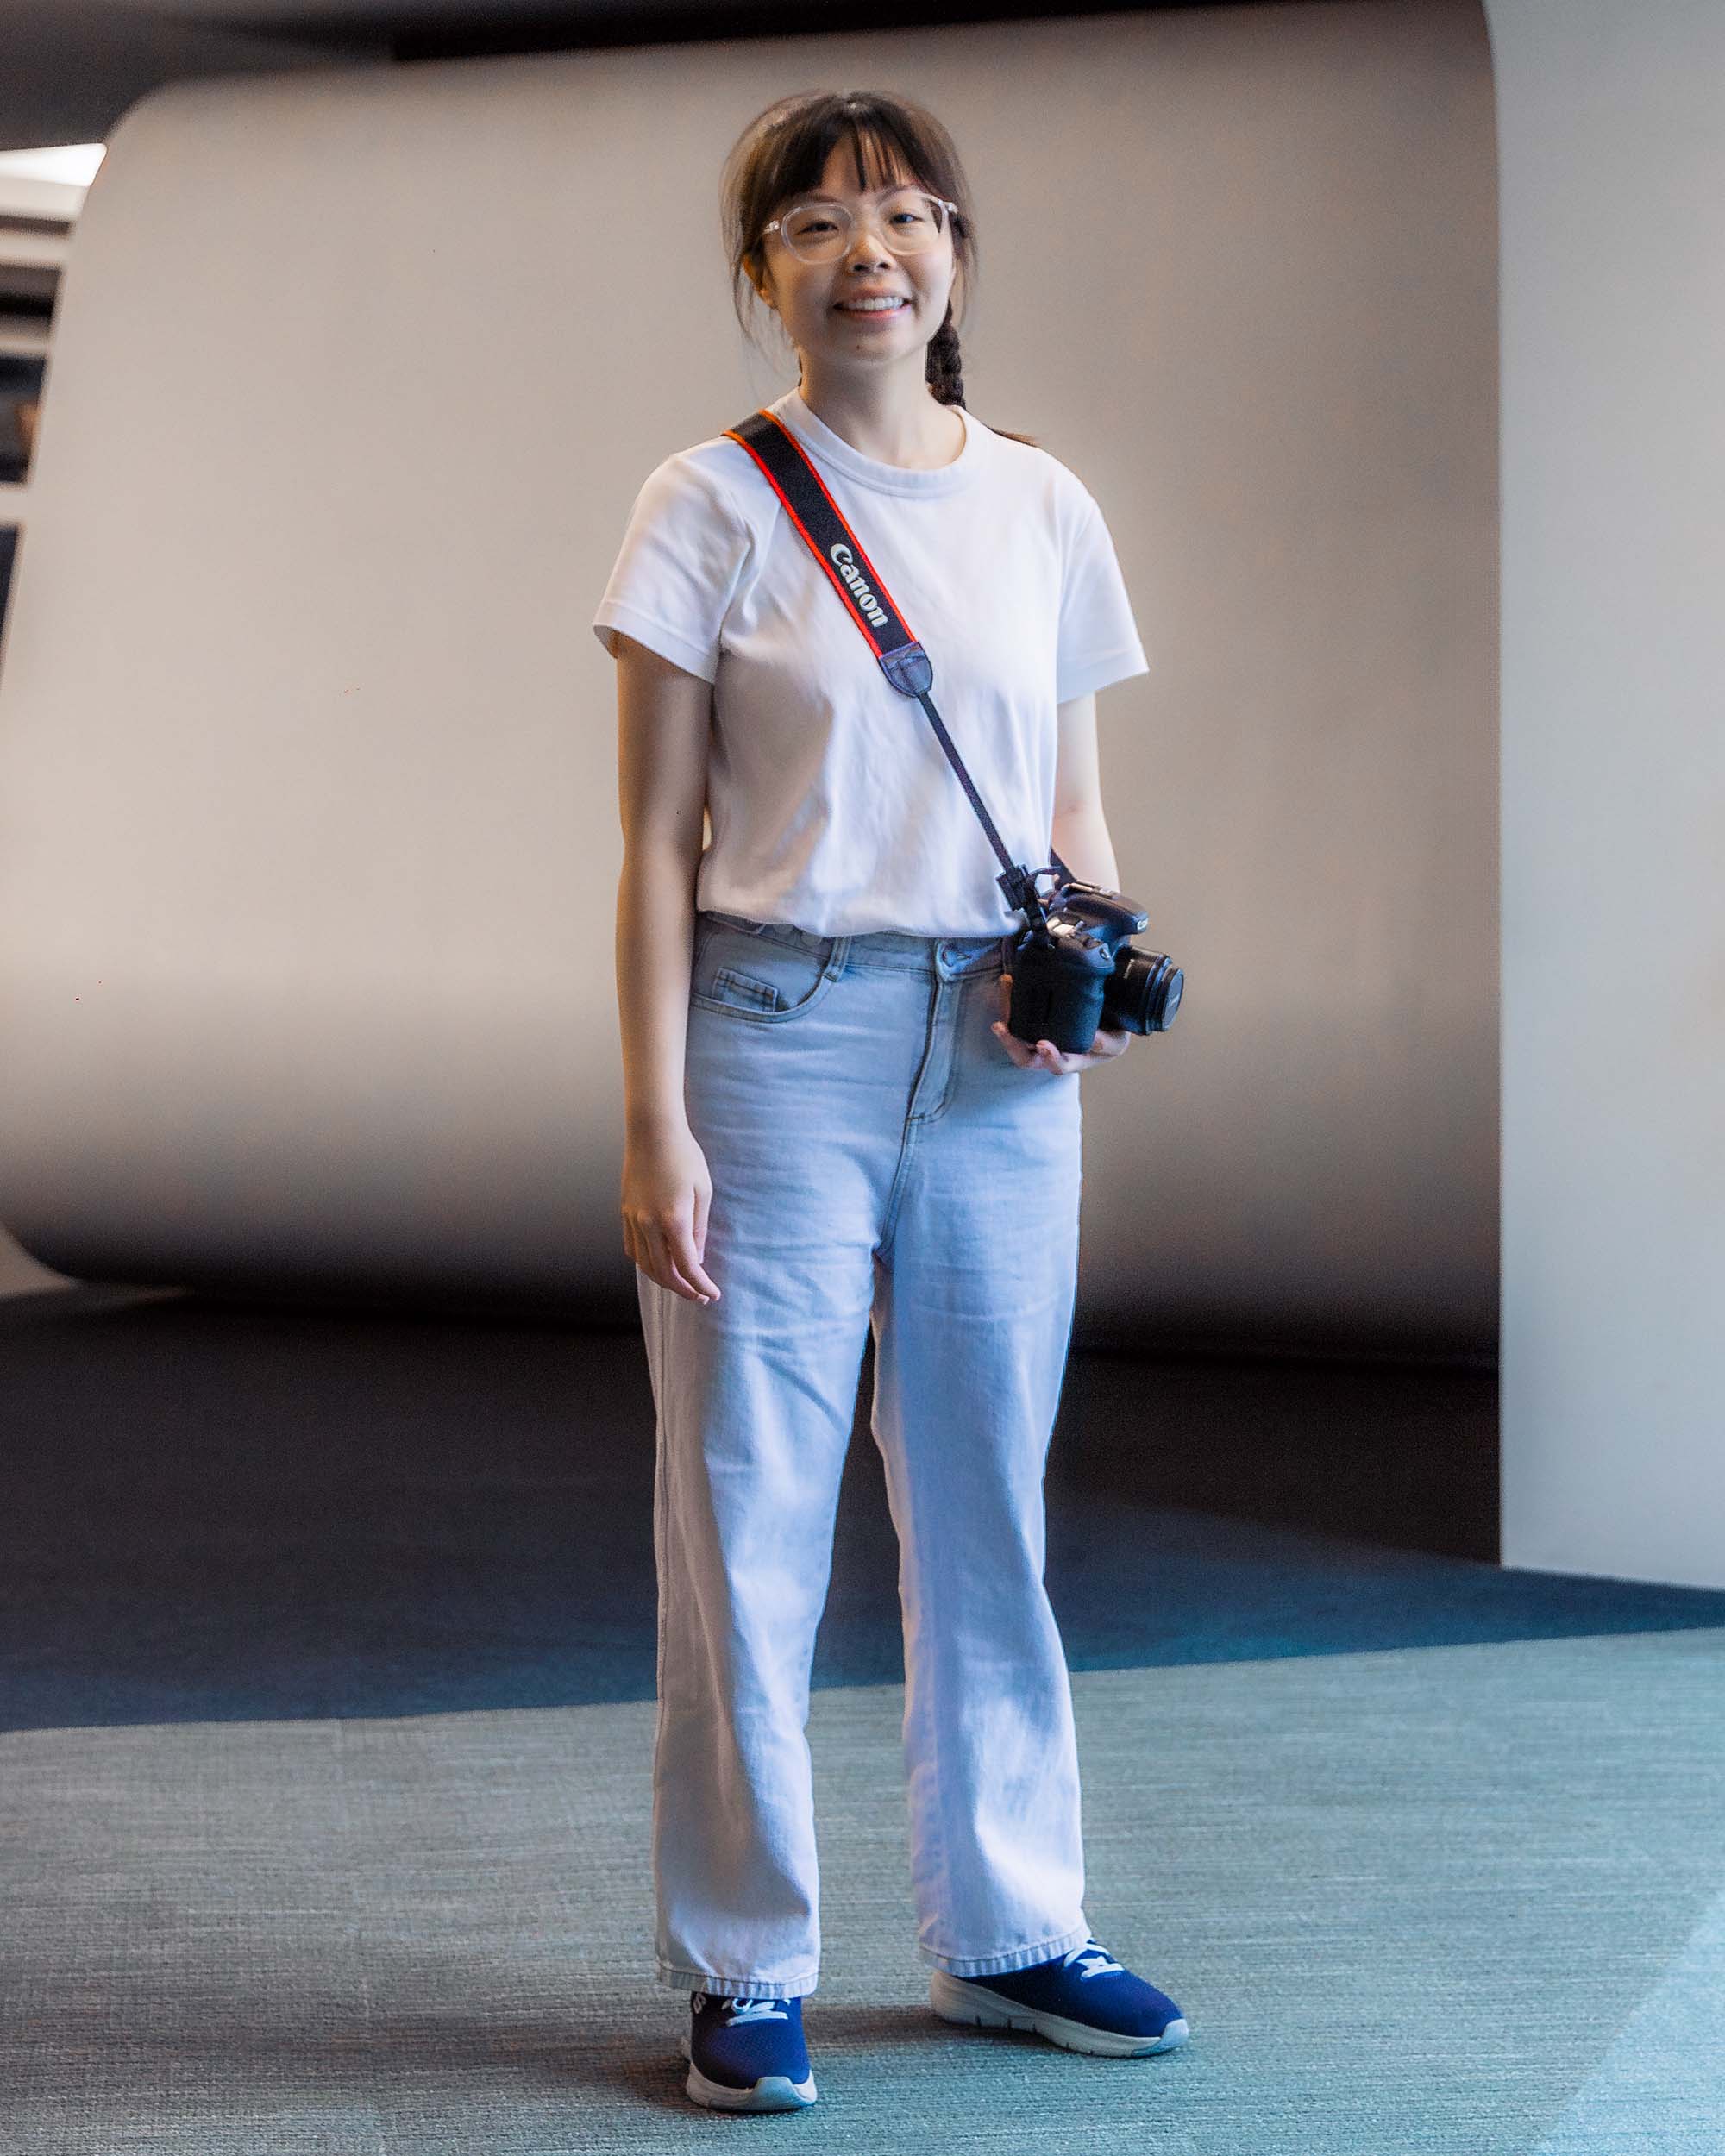 A portrait shot of Amanda Wong. She is standing and has a camera strapped to her neck with a lanyard. Her left hand is supporting the camera.